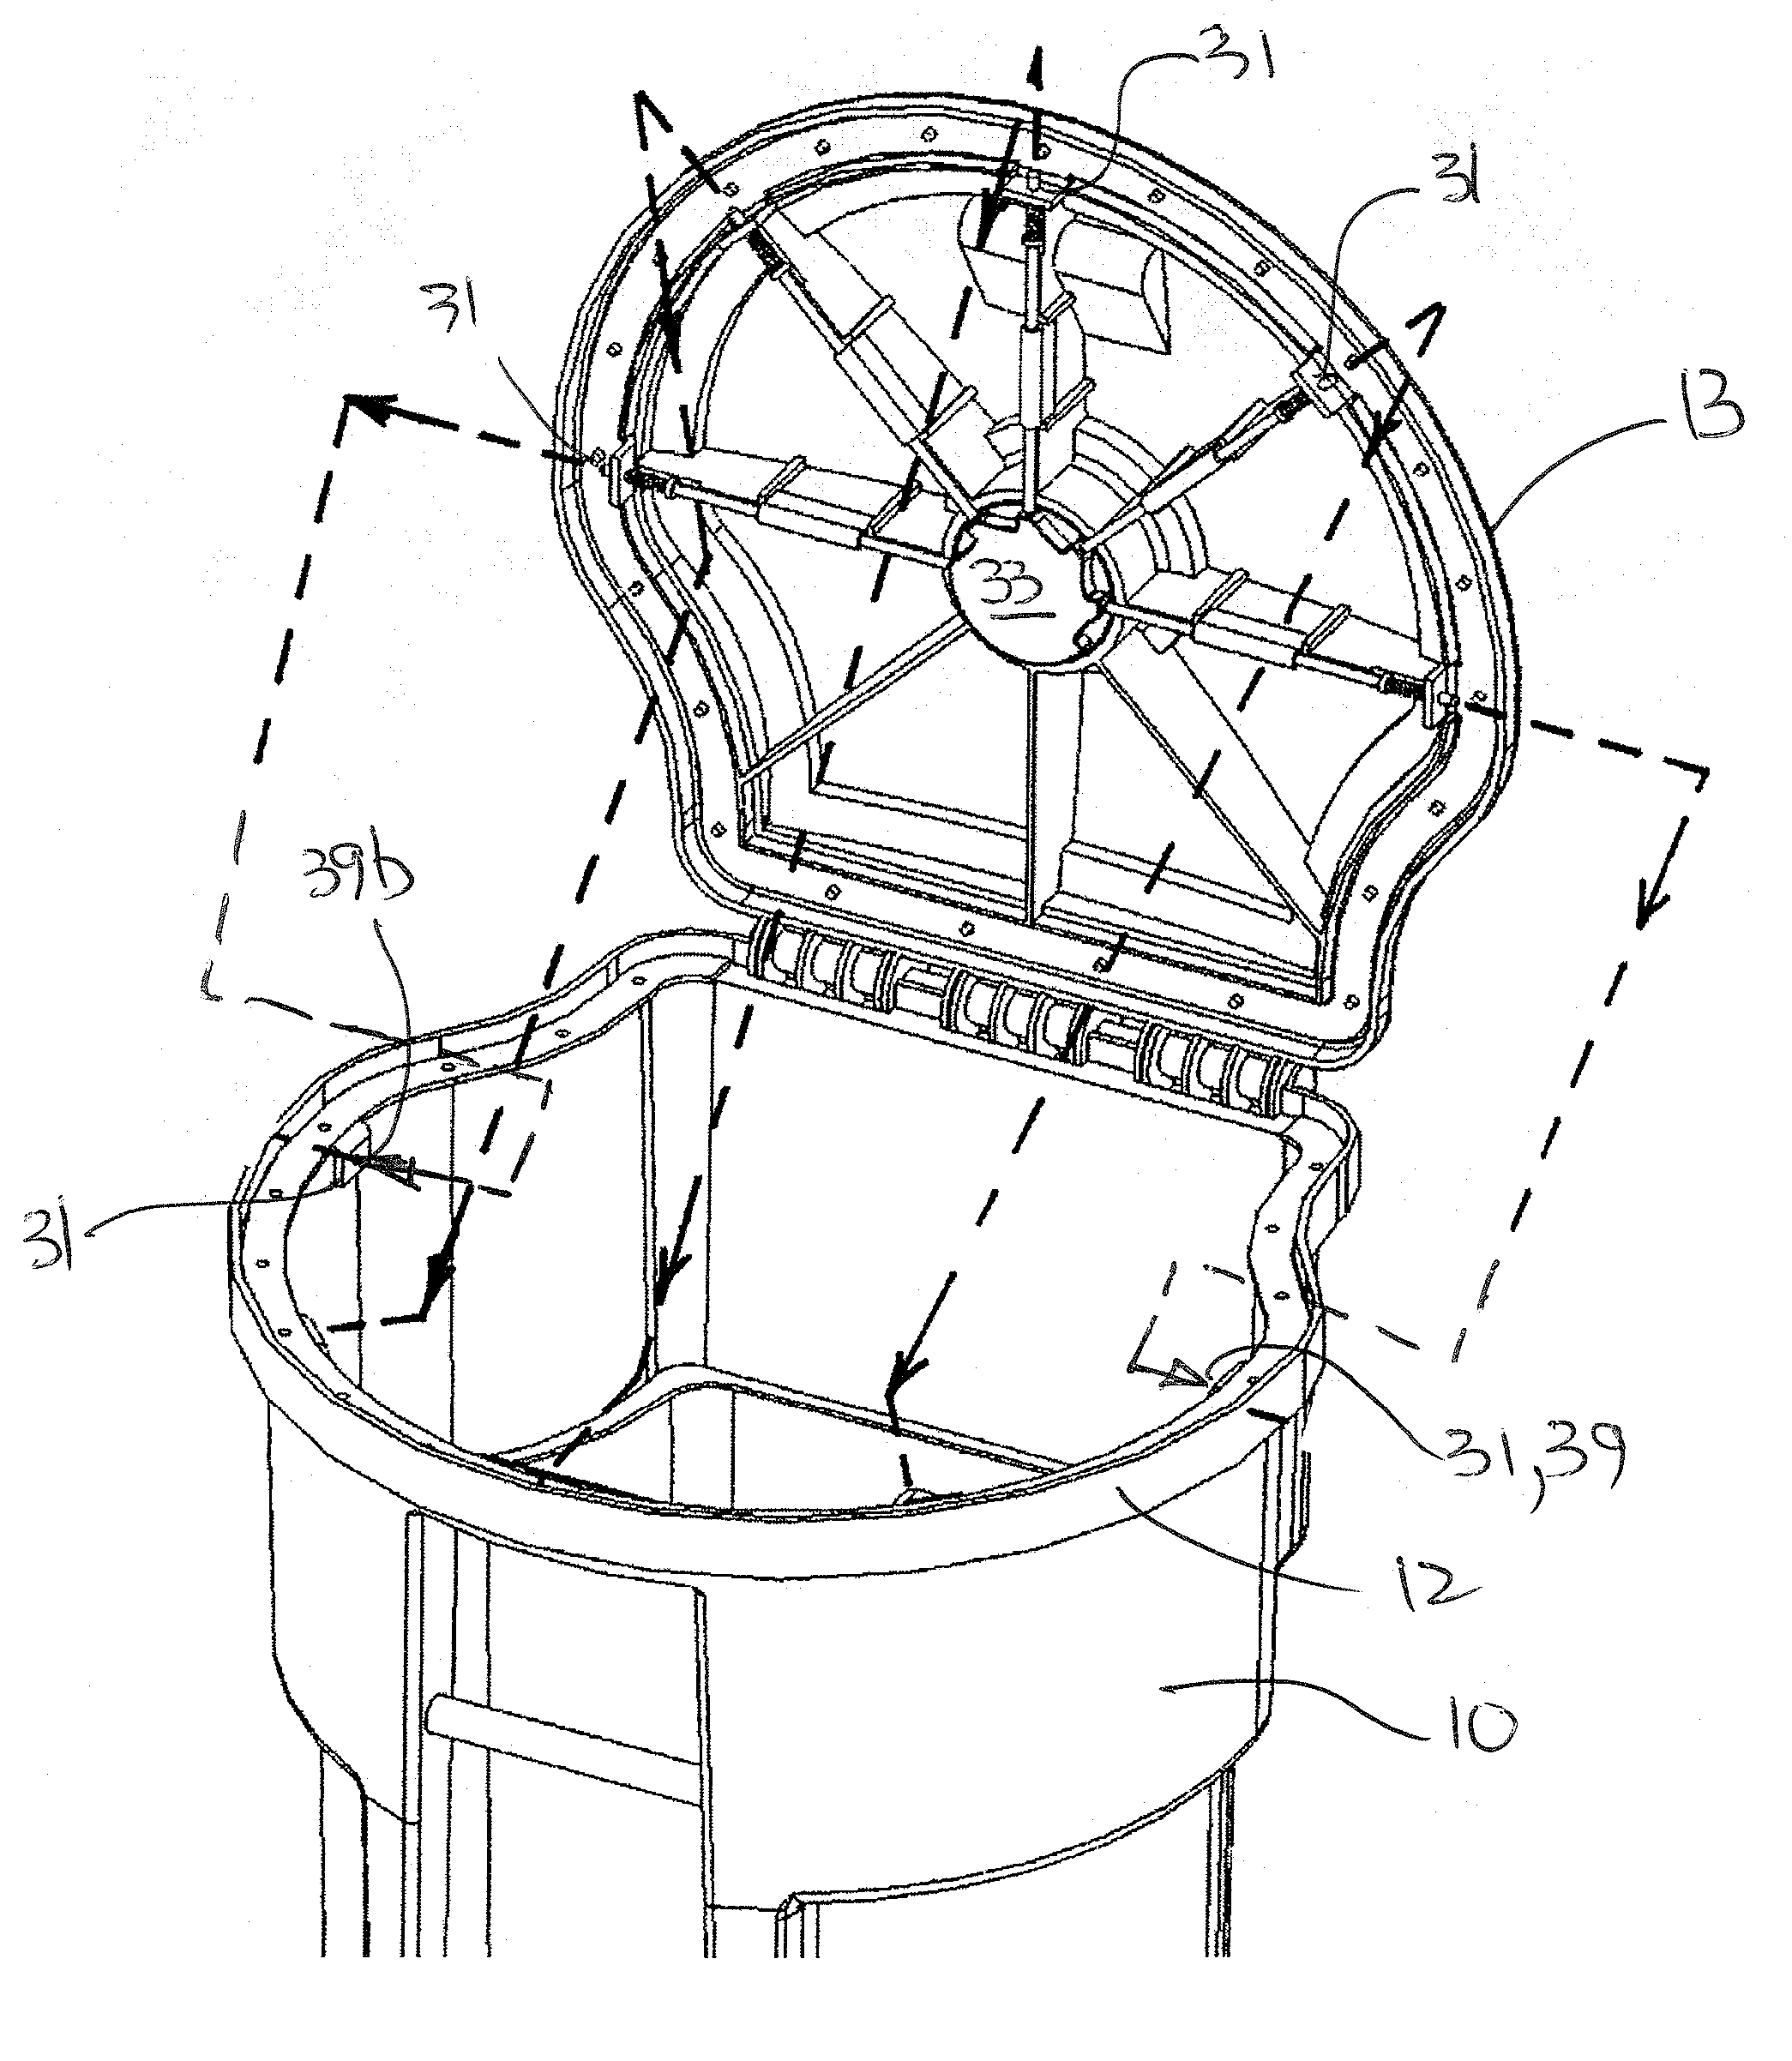 Animal-resistant resilient trash container and lid mechanism